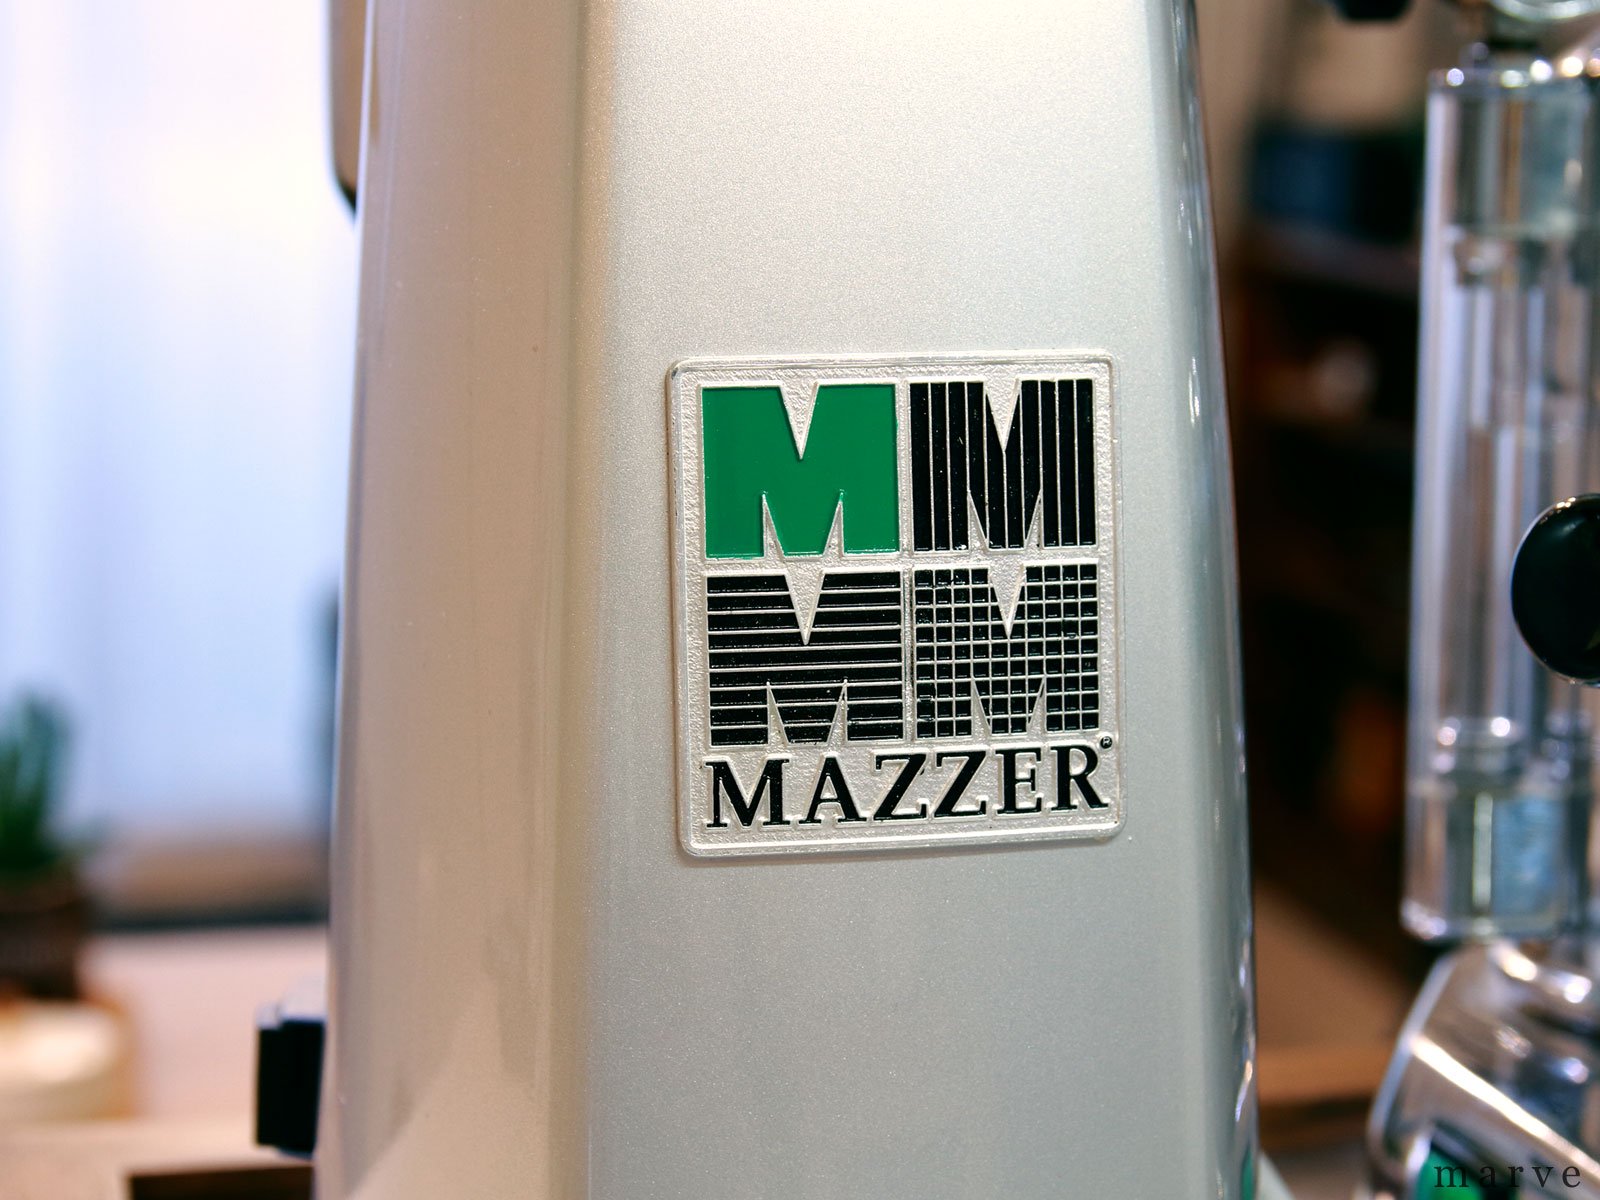 mp coffee gear MAZZER（マッツァ）グラインダー　MINI - ELECTRONIC(A)　アルミノ<img class='new_mark_img2' src='https://img.shop-pro.jp/img/new/icons16.gif' style='border:none;display:inline;margin:0px;padding:0px;width:auto;' />